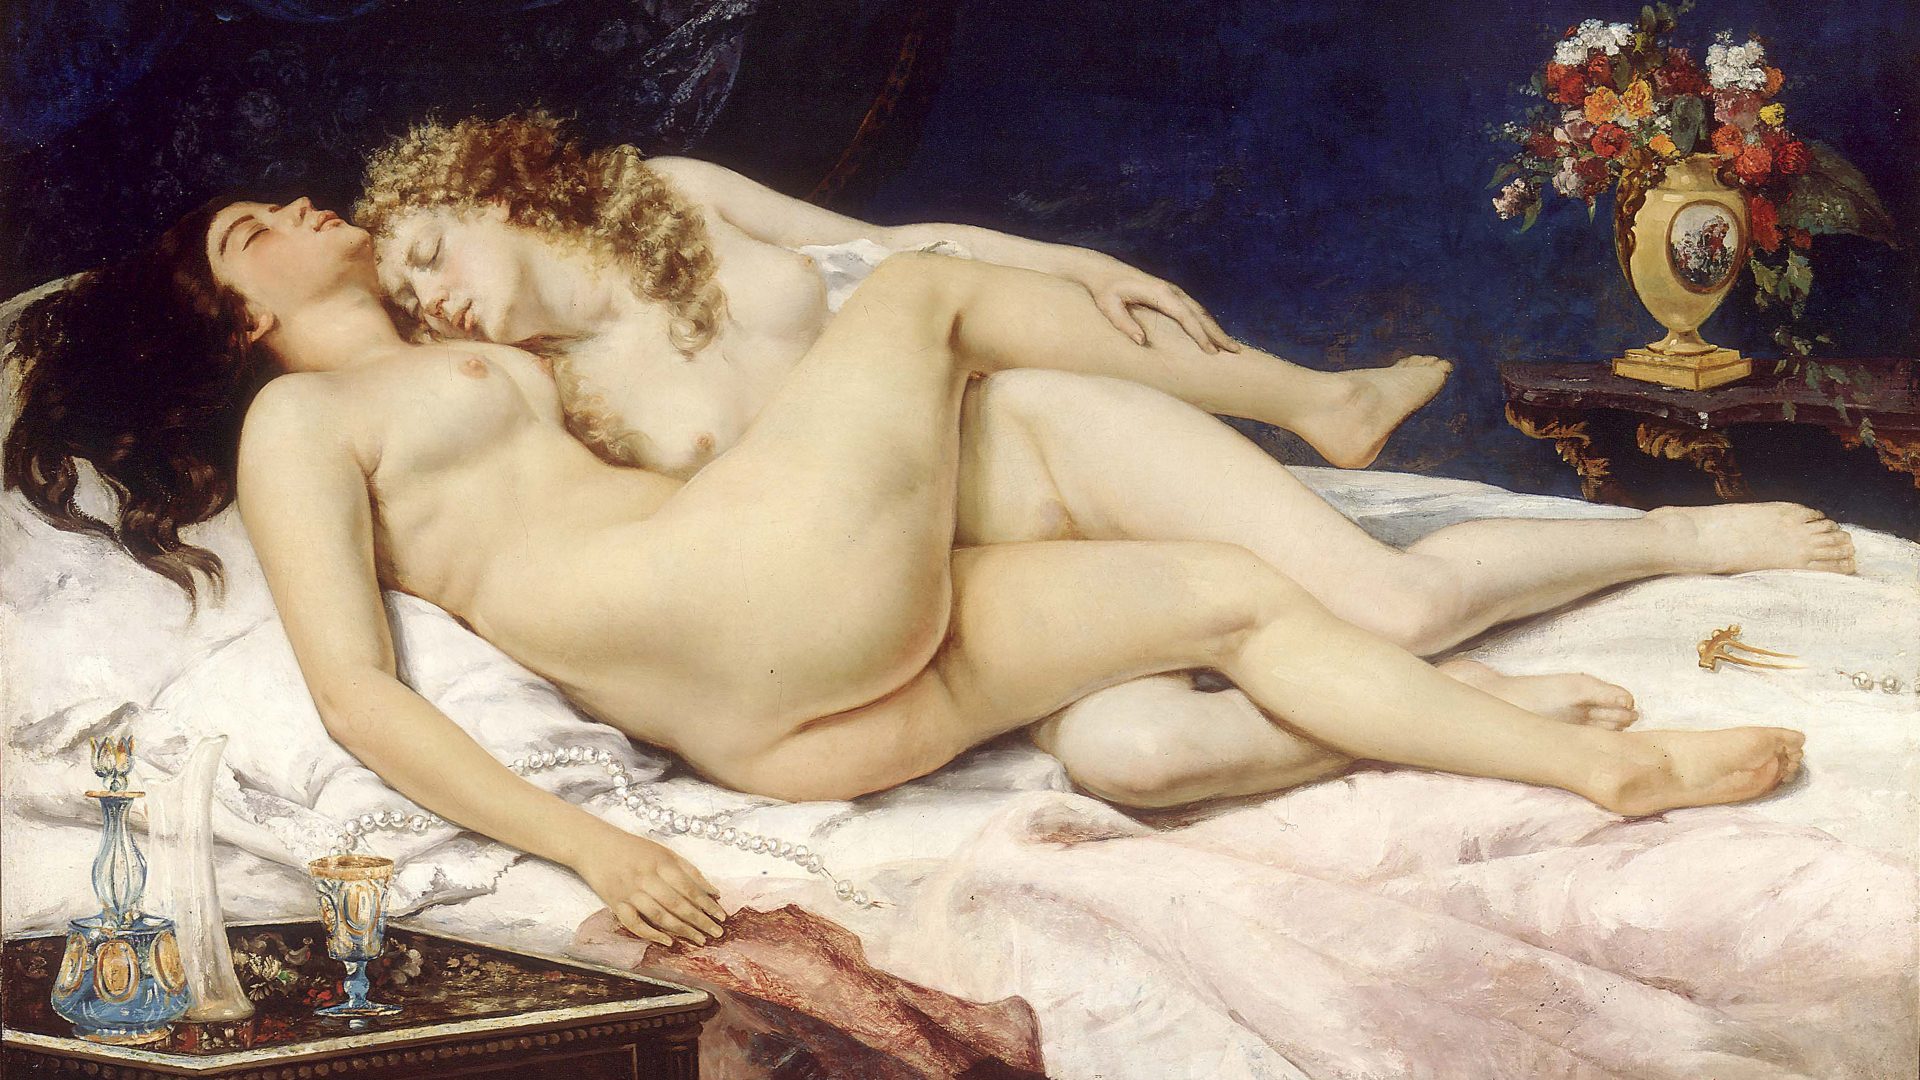 Le Sommeil by Gustave Courbet, 1866 (Photo: Leemage/Corbis/Getty)